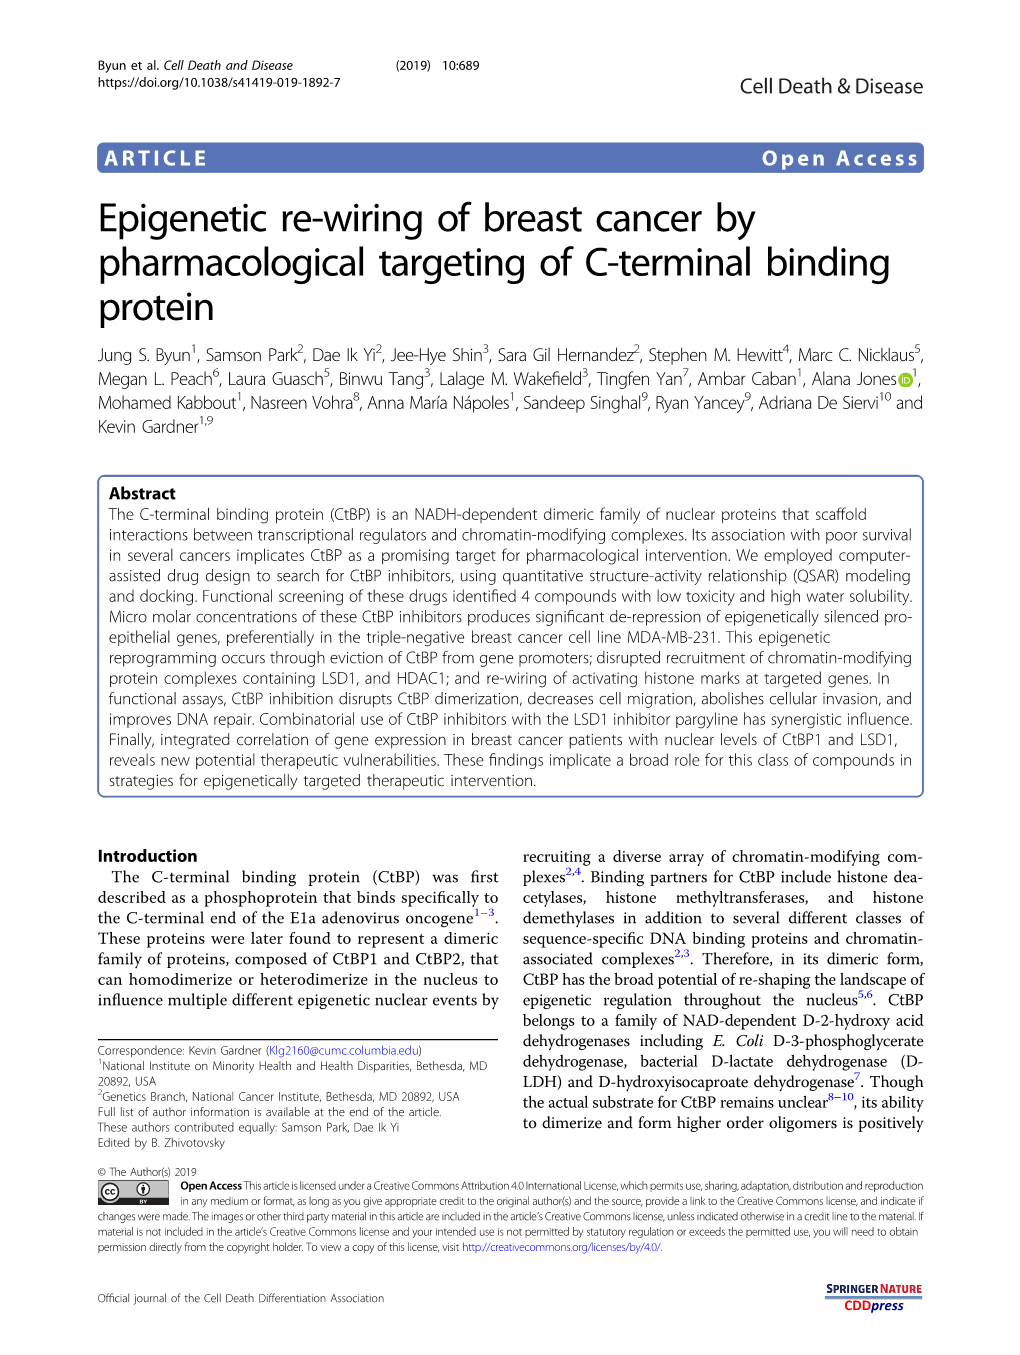 Epigenetic Re-Wiring of Breast Cancer by Pharmacological Targeting of C-Terminal Binding Protein Jung S